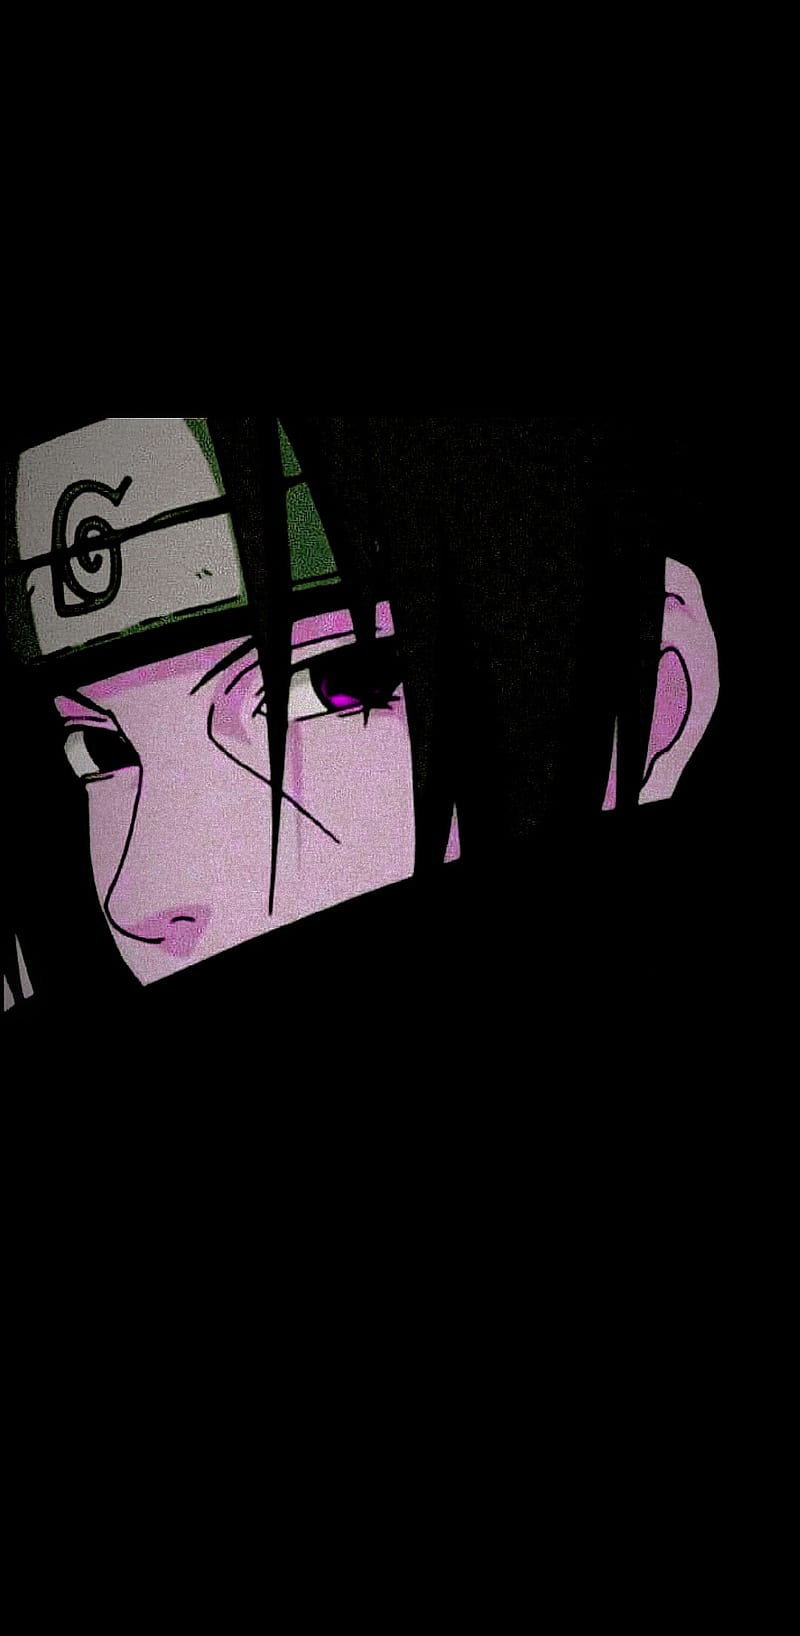 A close up of an animated character with black hair - Itachi Uchiha